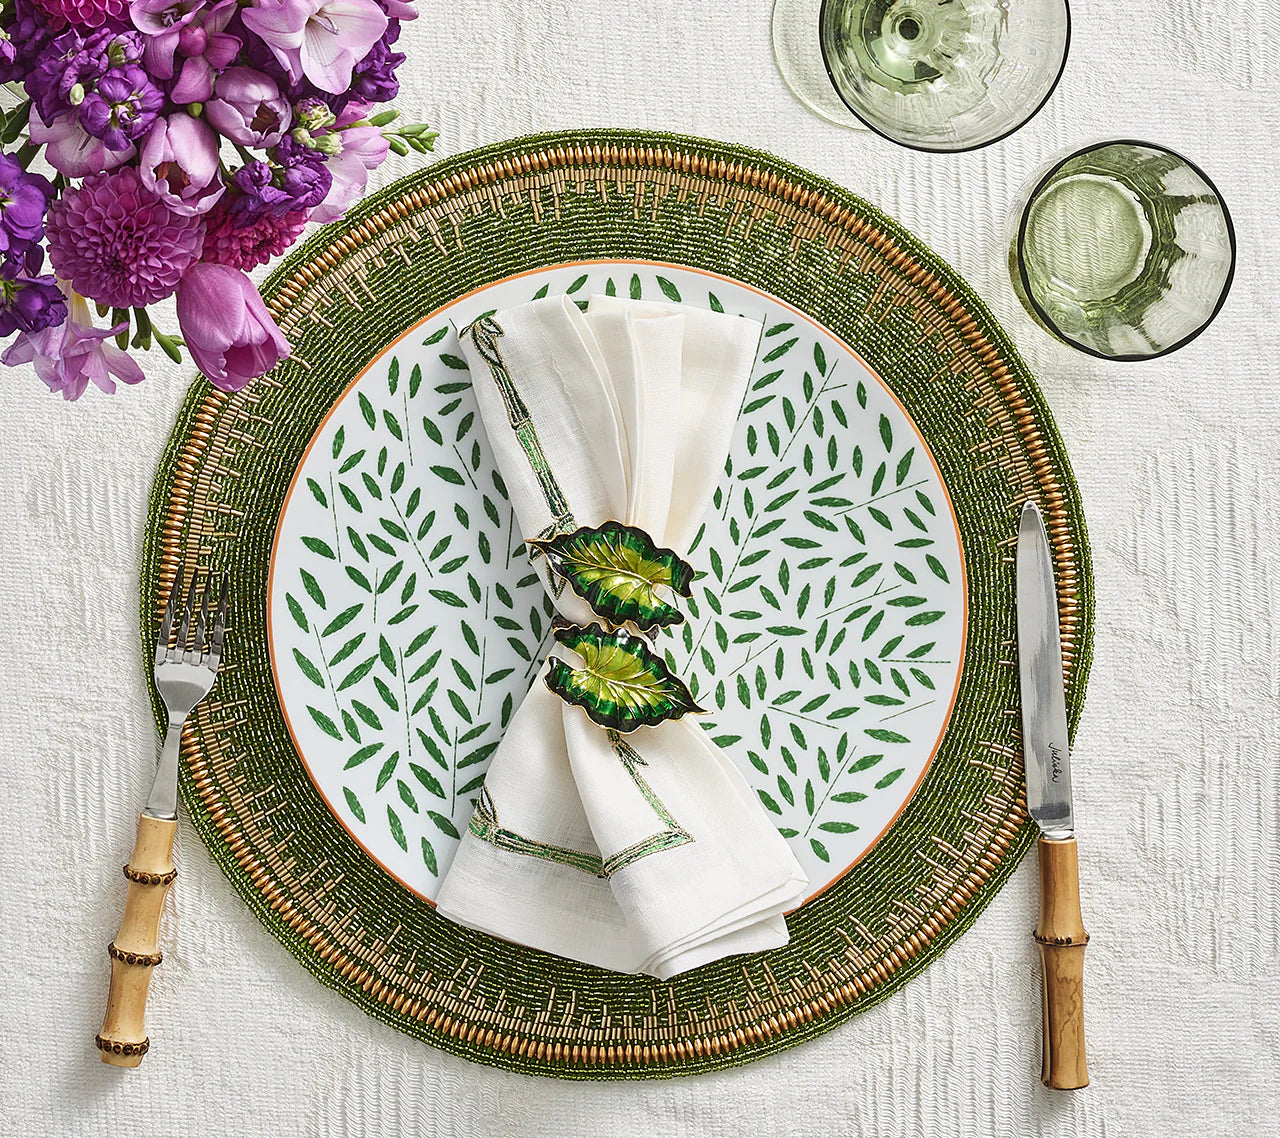 Bamboo Napkin in White, Green & Gold, Set of 4